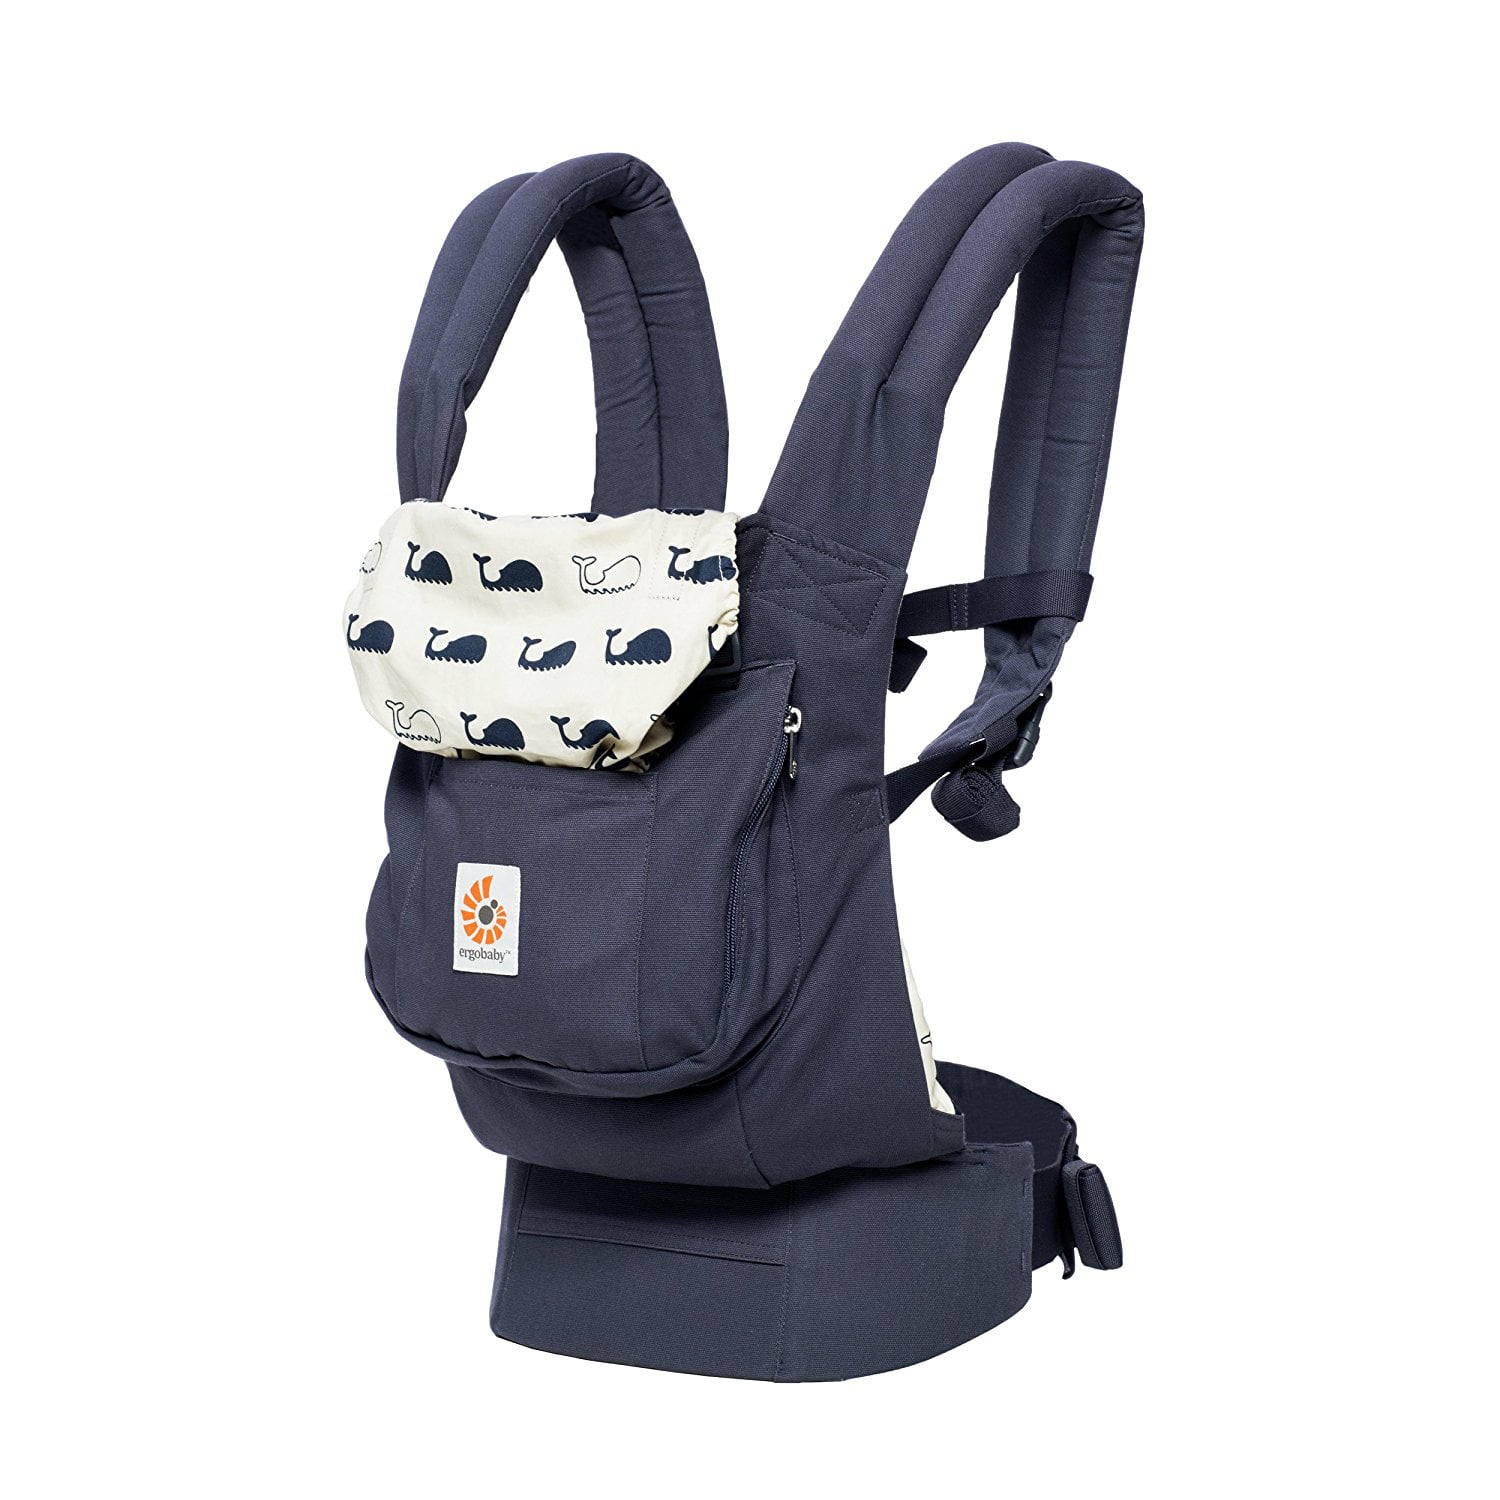 is ergo baby carrier worth the money